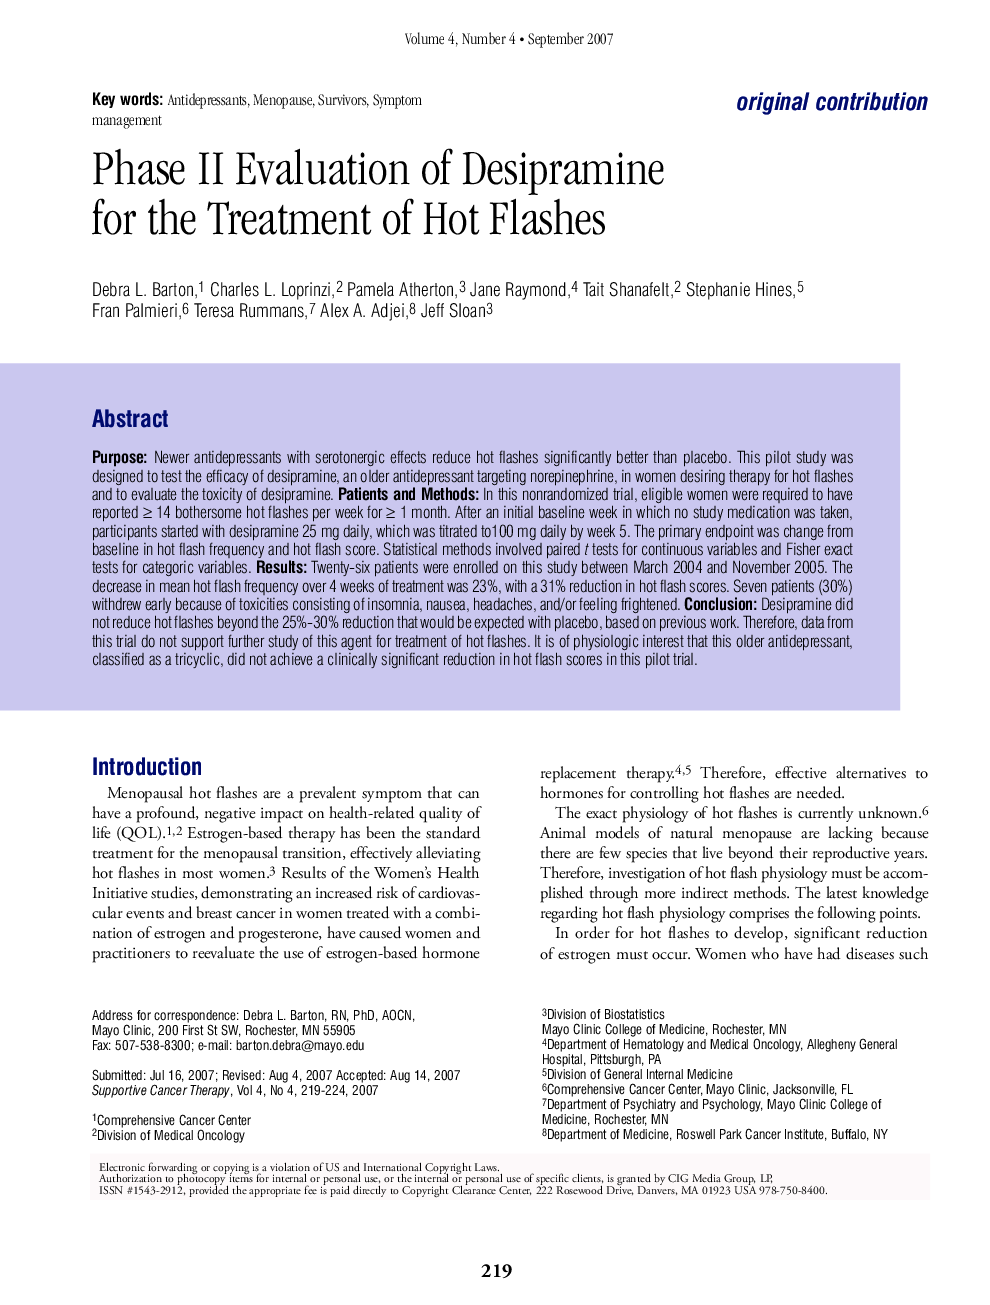 Phase II Evaluation of Desipramine for the Treatment of Hot Flashes